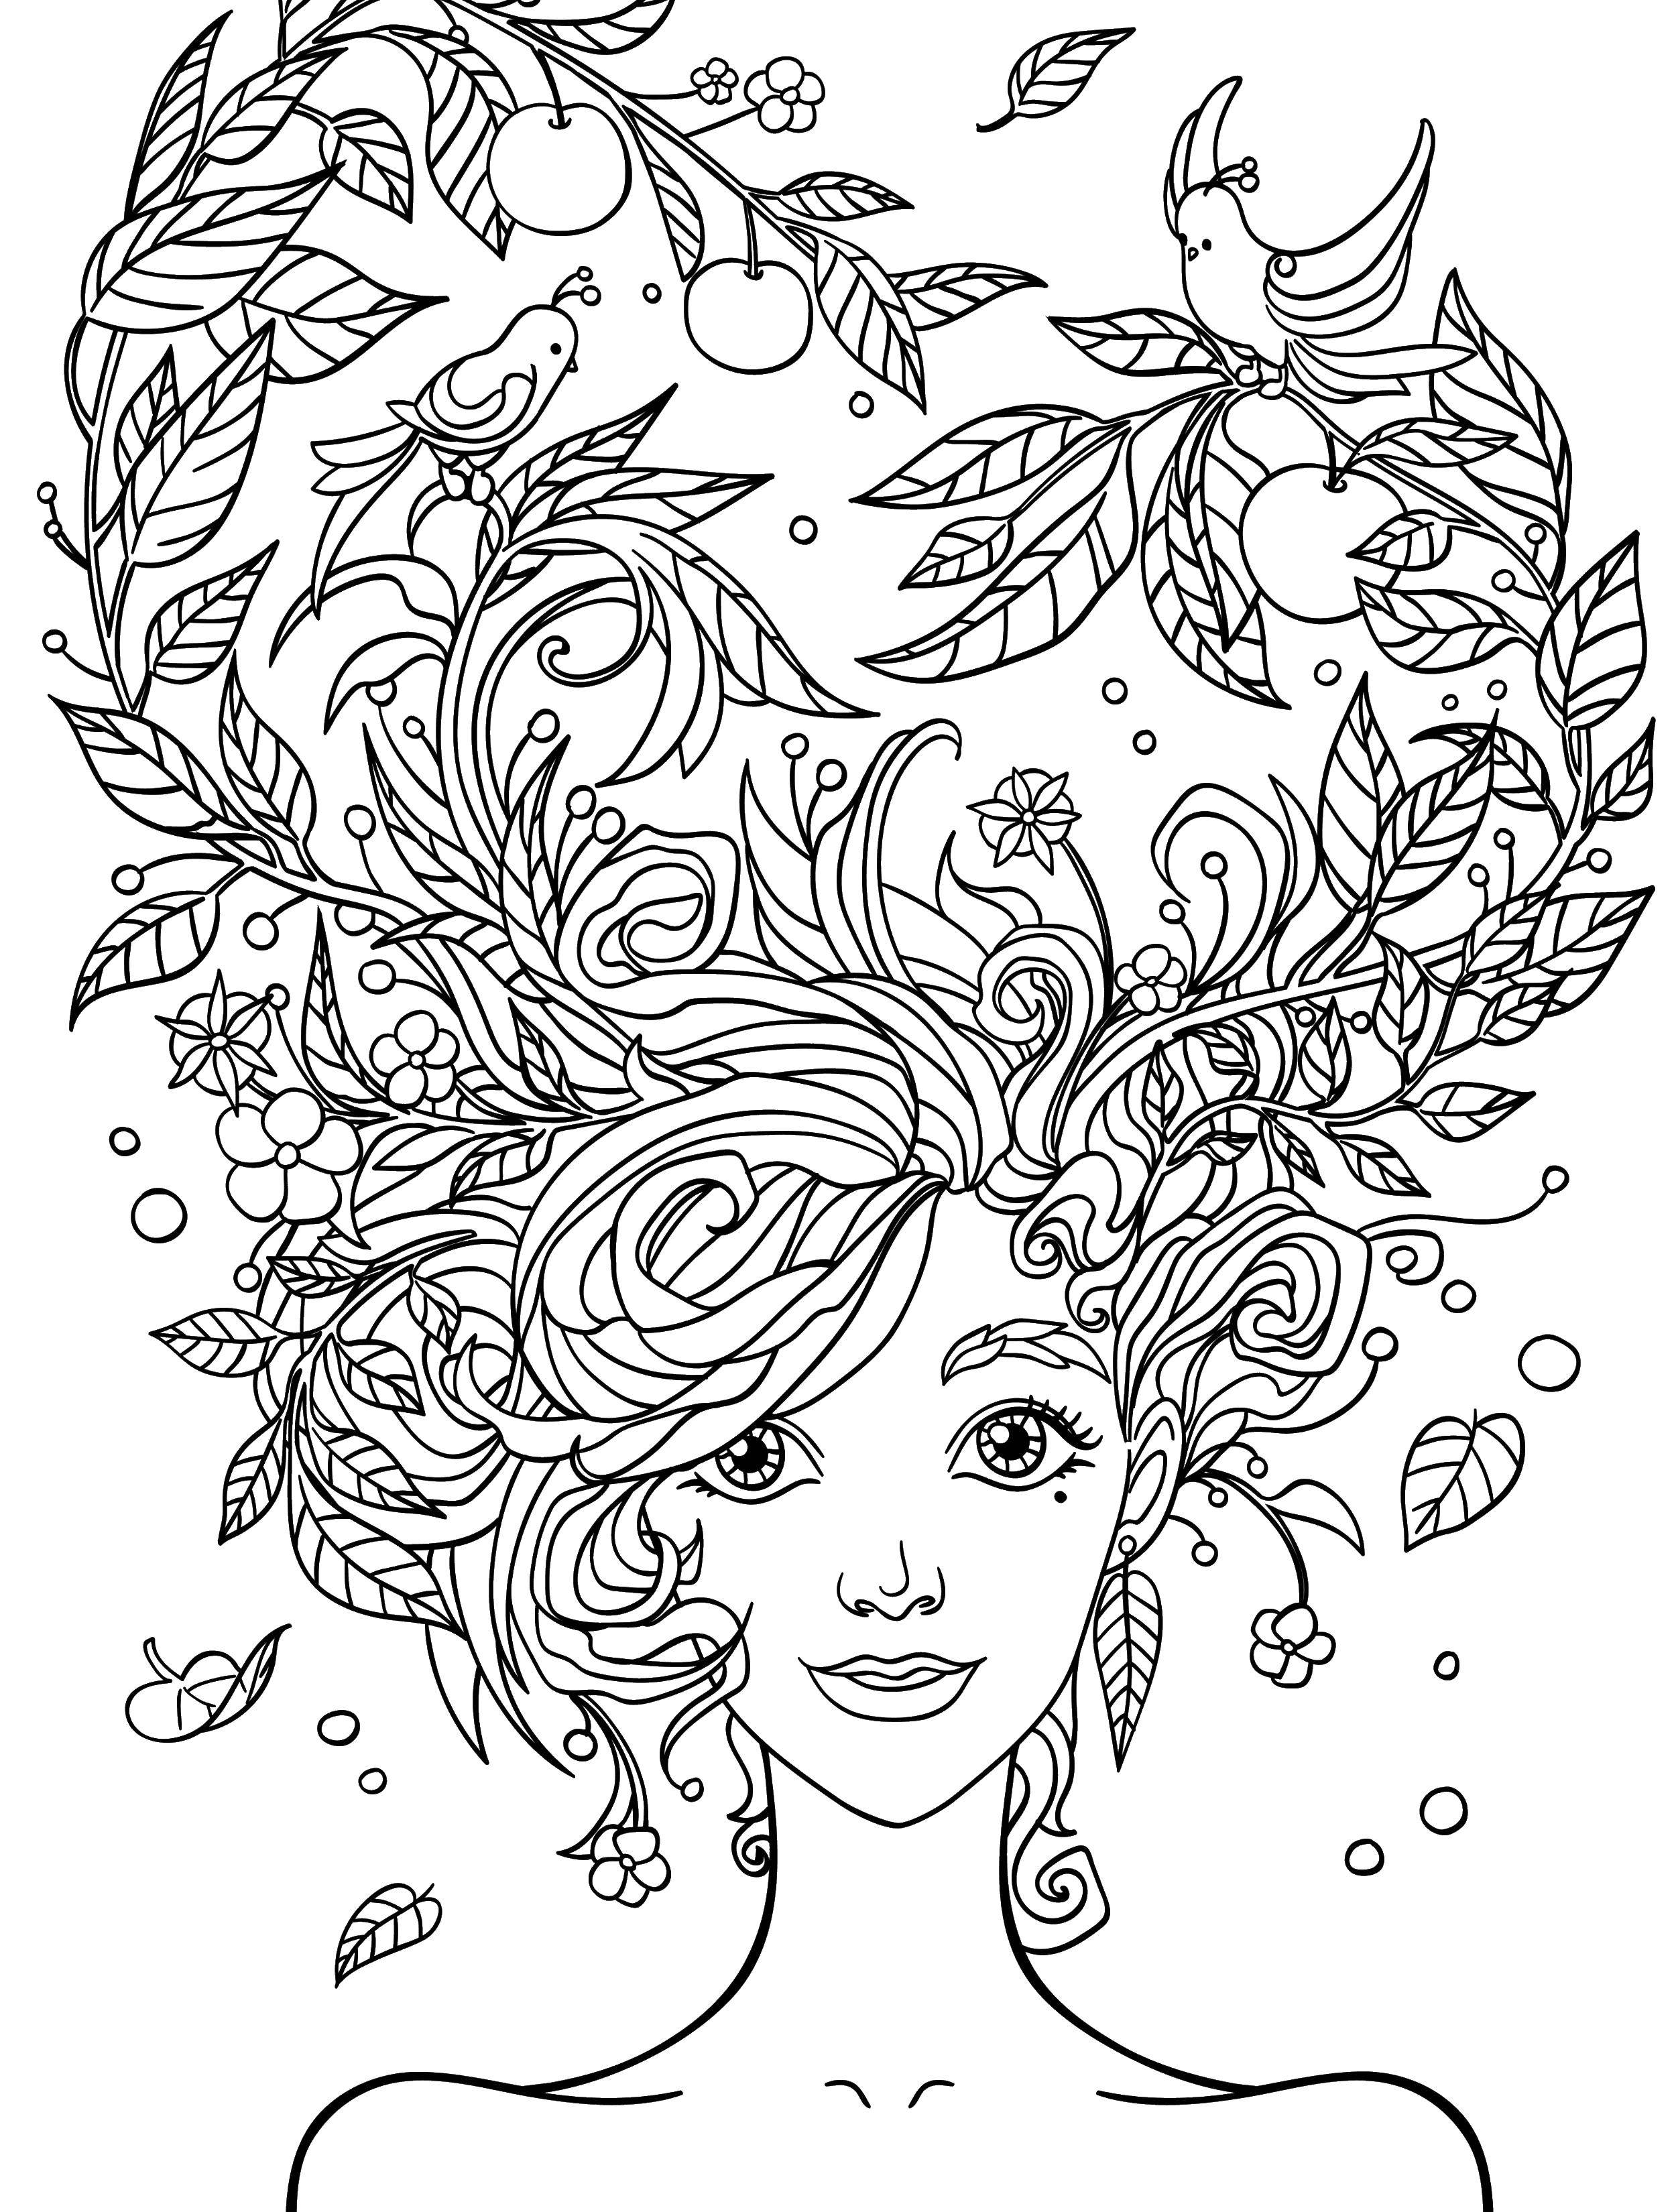 Coloring Girl. Category The hair. Tags:  girl, hair.